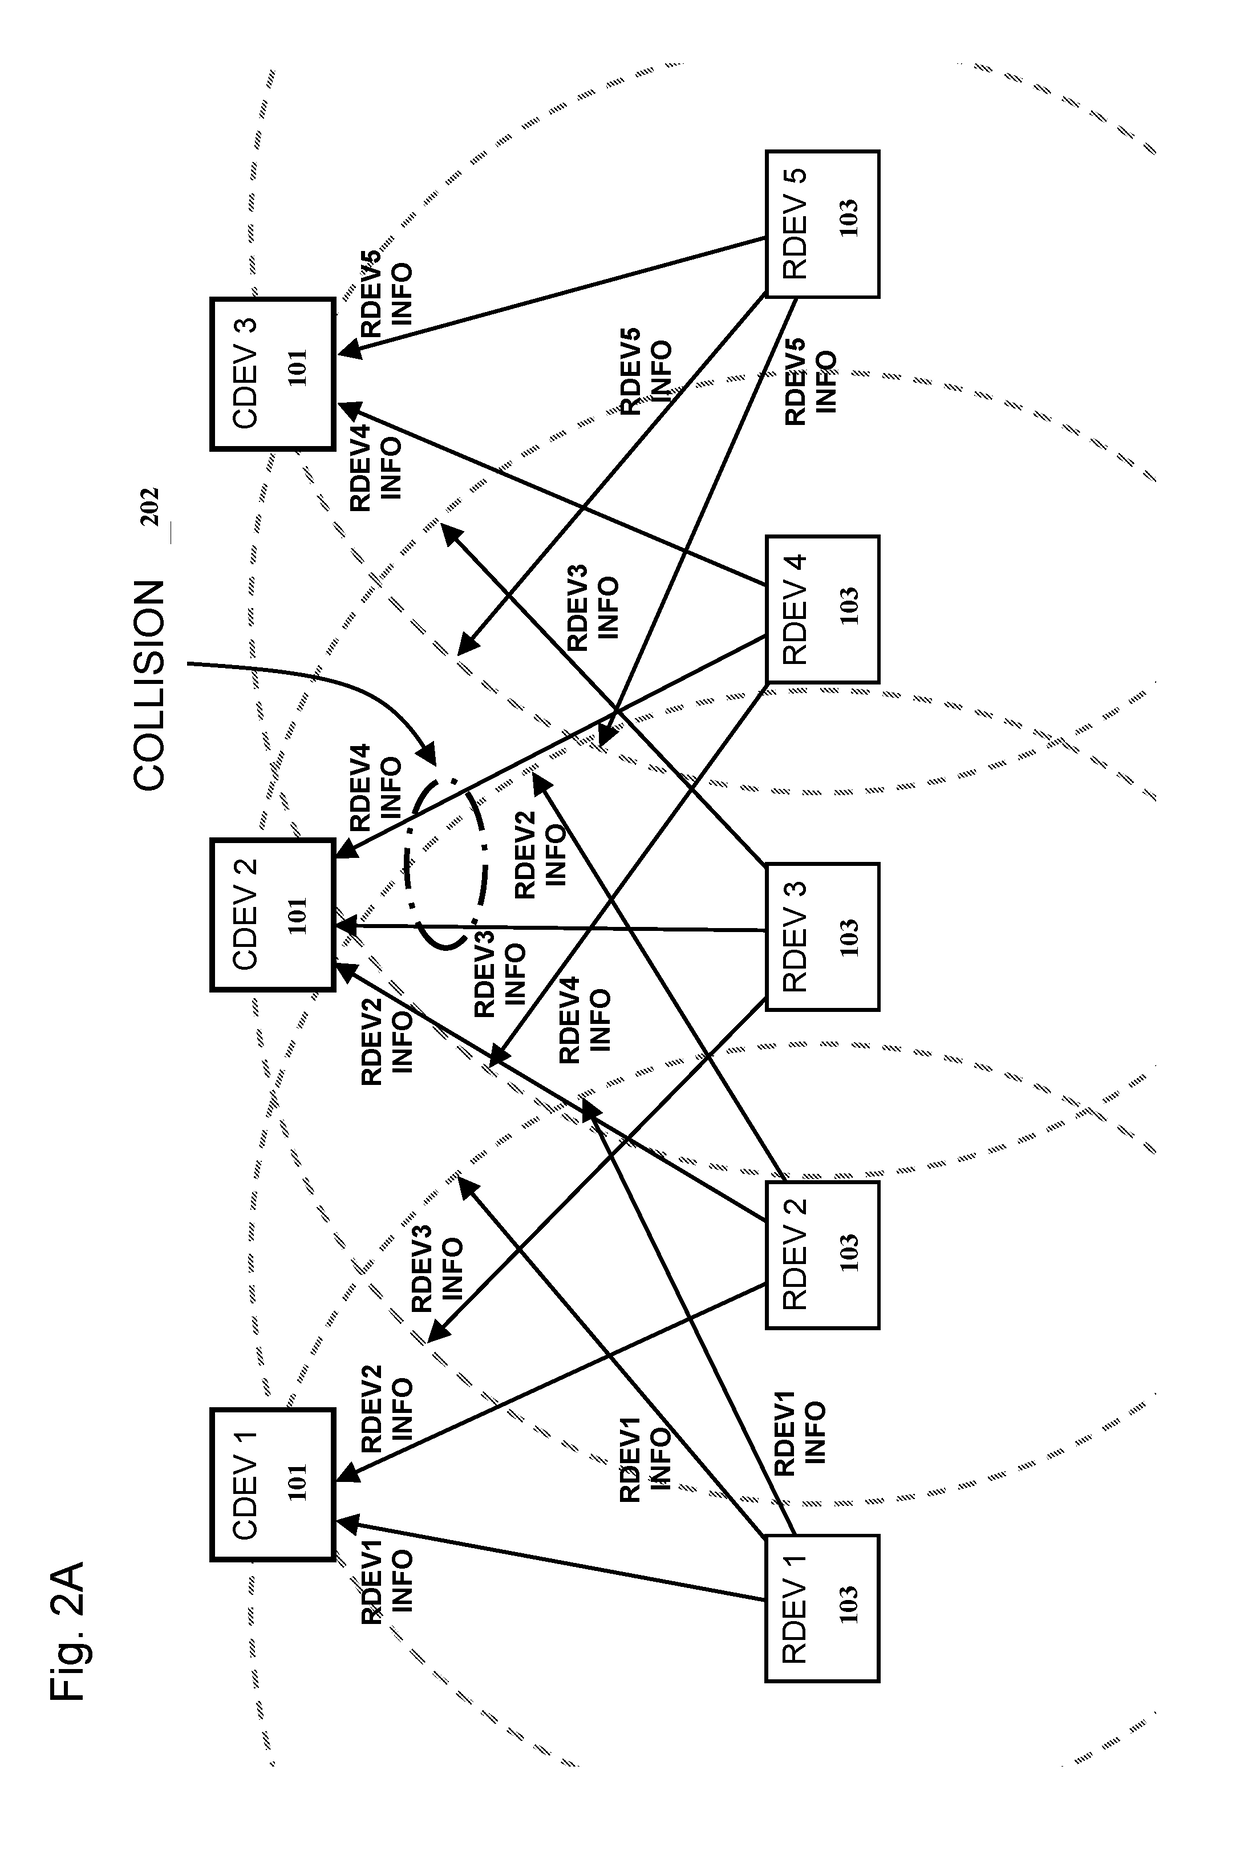 Communications protocol for data transmission